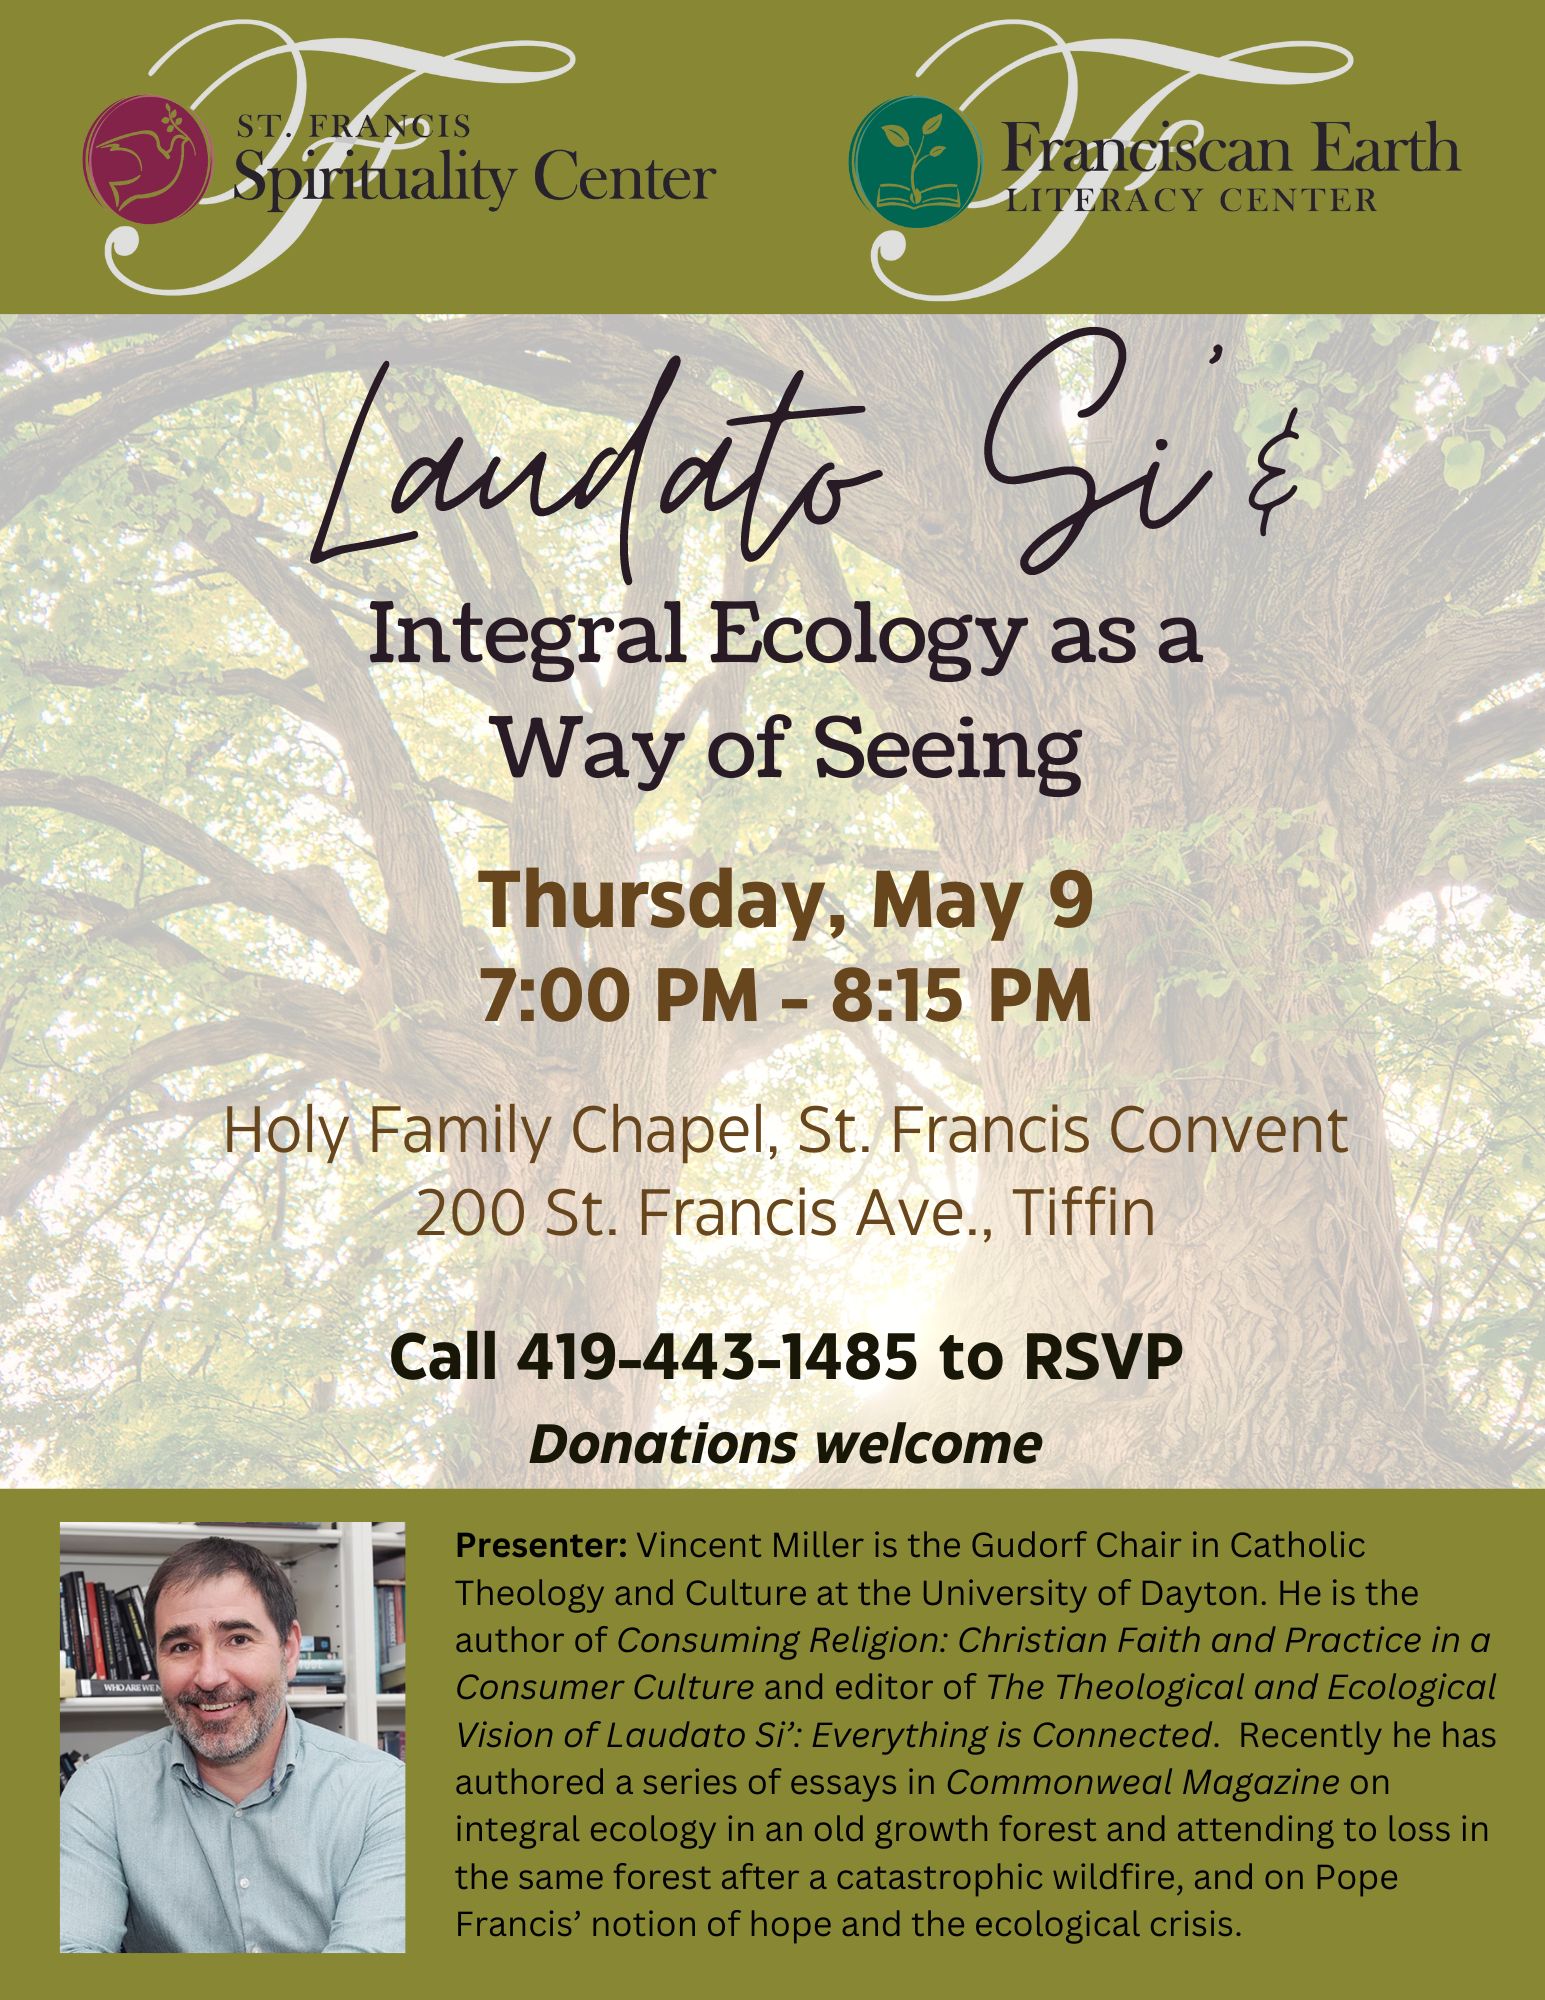 Laudato Si' & Integral Ecology as a Way of Seeing